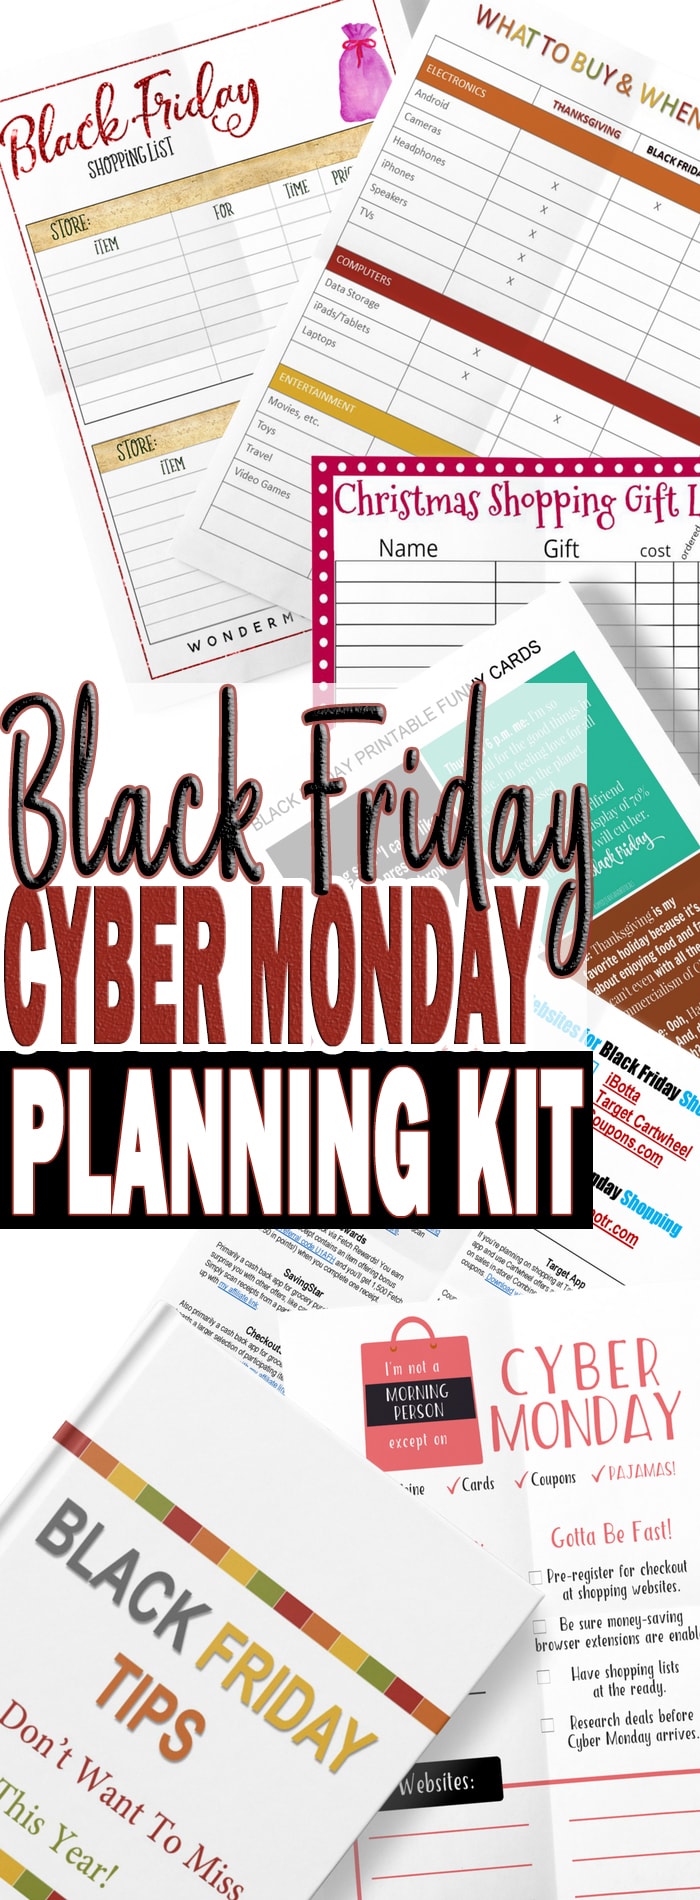 Black Friday Cyber Monday Planning Kit printables so you can be organized and get the best shopping deals.